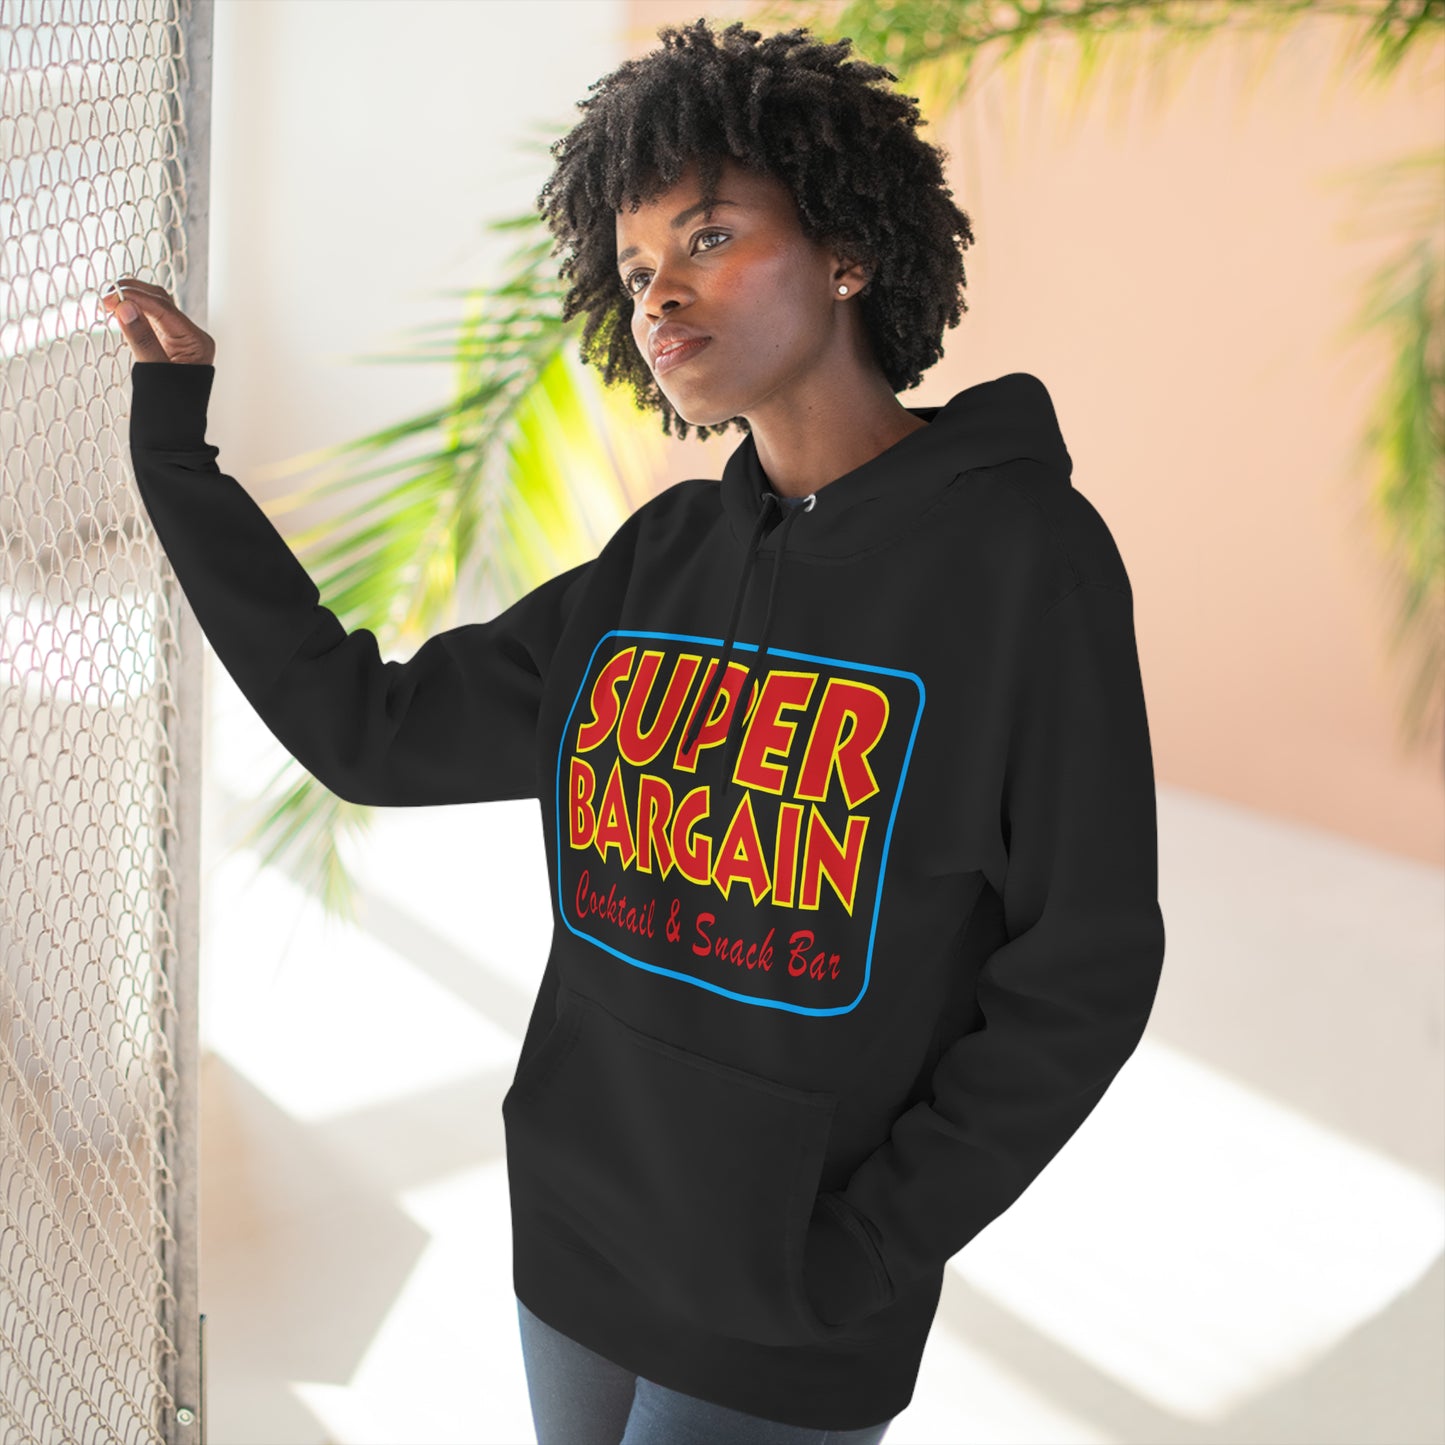 A woman wearing a black Printify Unisex Premium Pullover Hoodie with the colorful text "Super Bargain Central & Snack Bar" stands by a metal fence in Cabbagetown, Toronto, looking to the side thoughtfully.